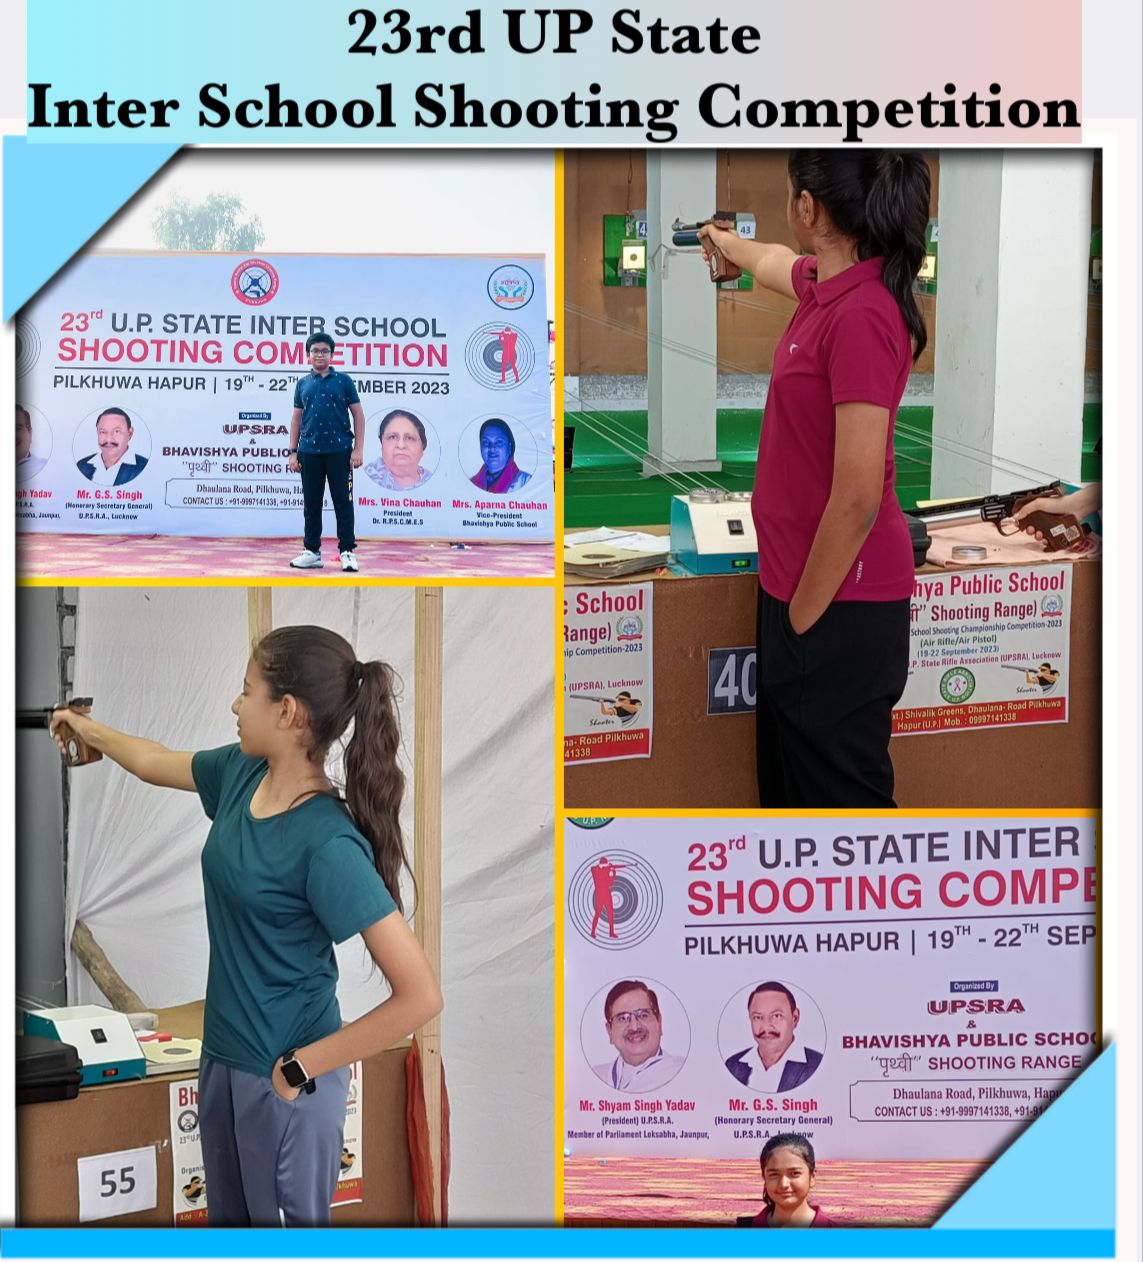 23rd UP State Inter School Shooting Competition